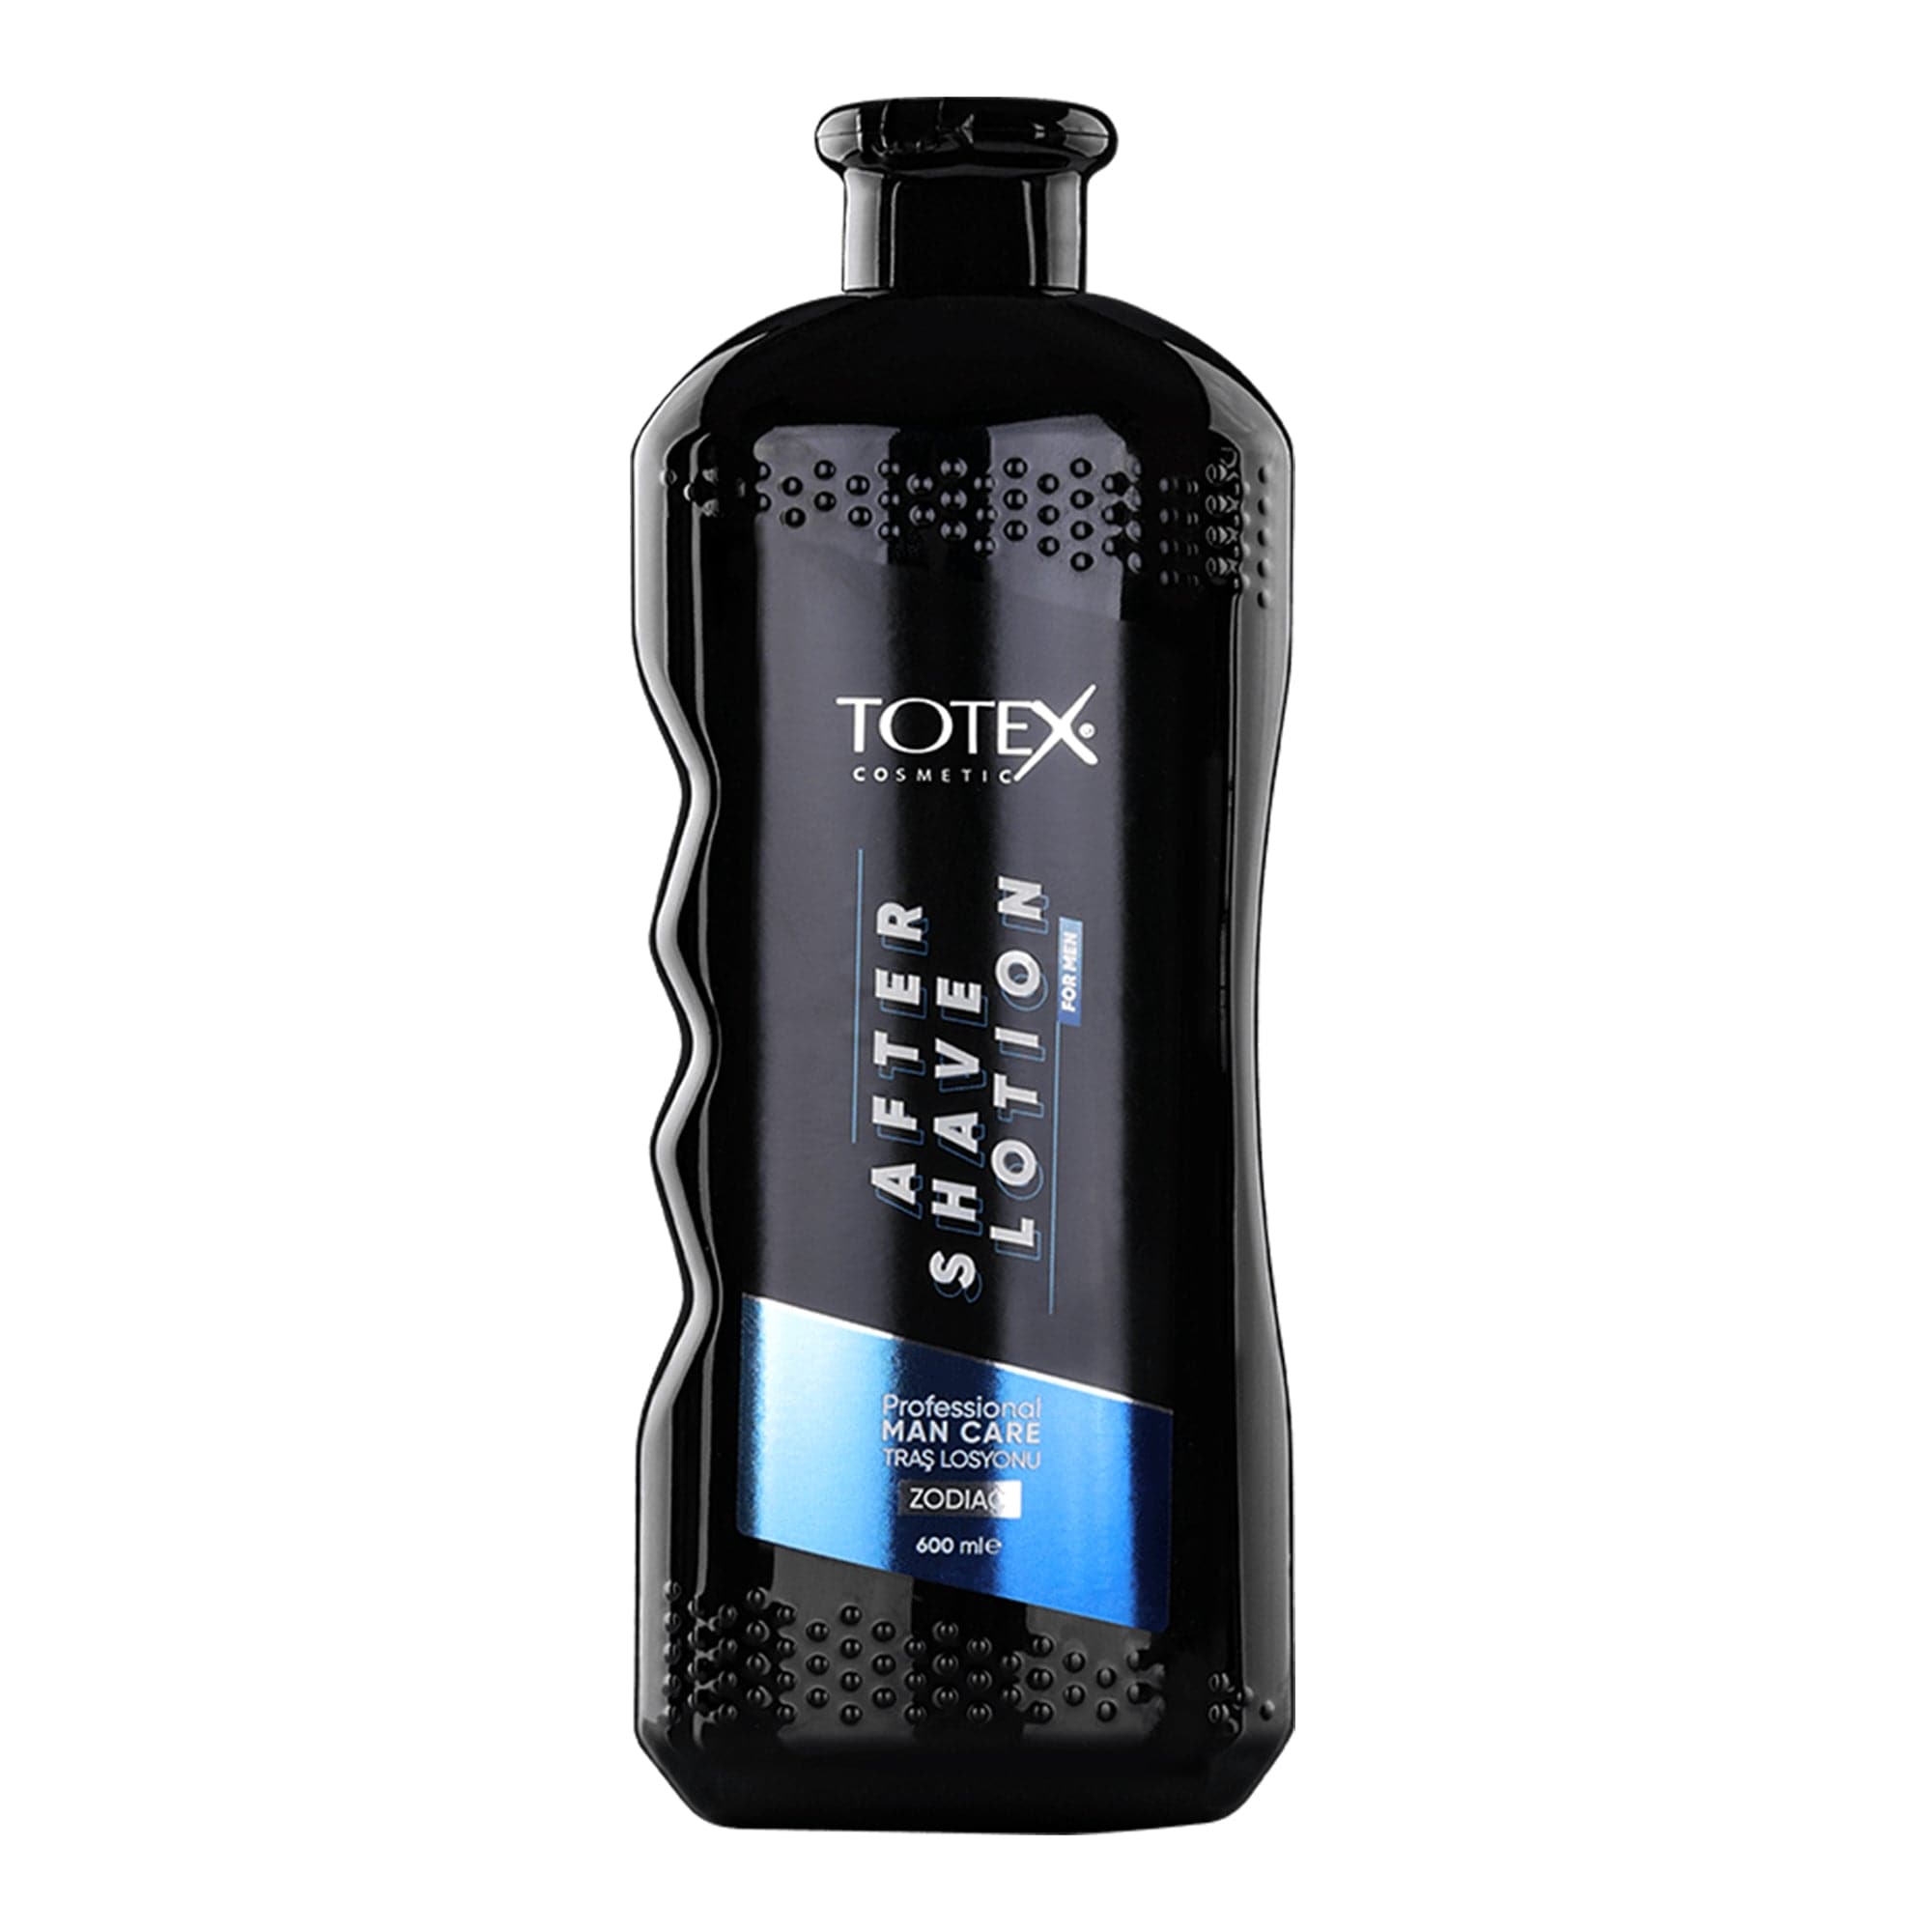 Totex - After Shave Lotion Zodiac 600ml